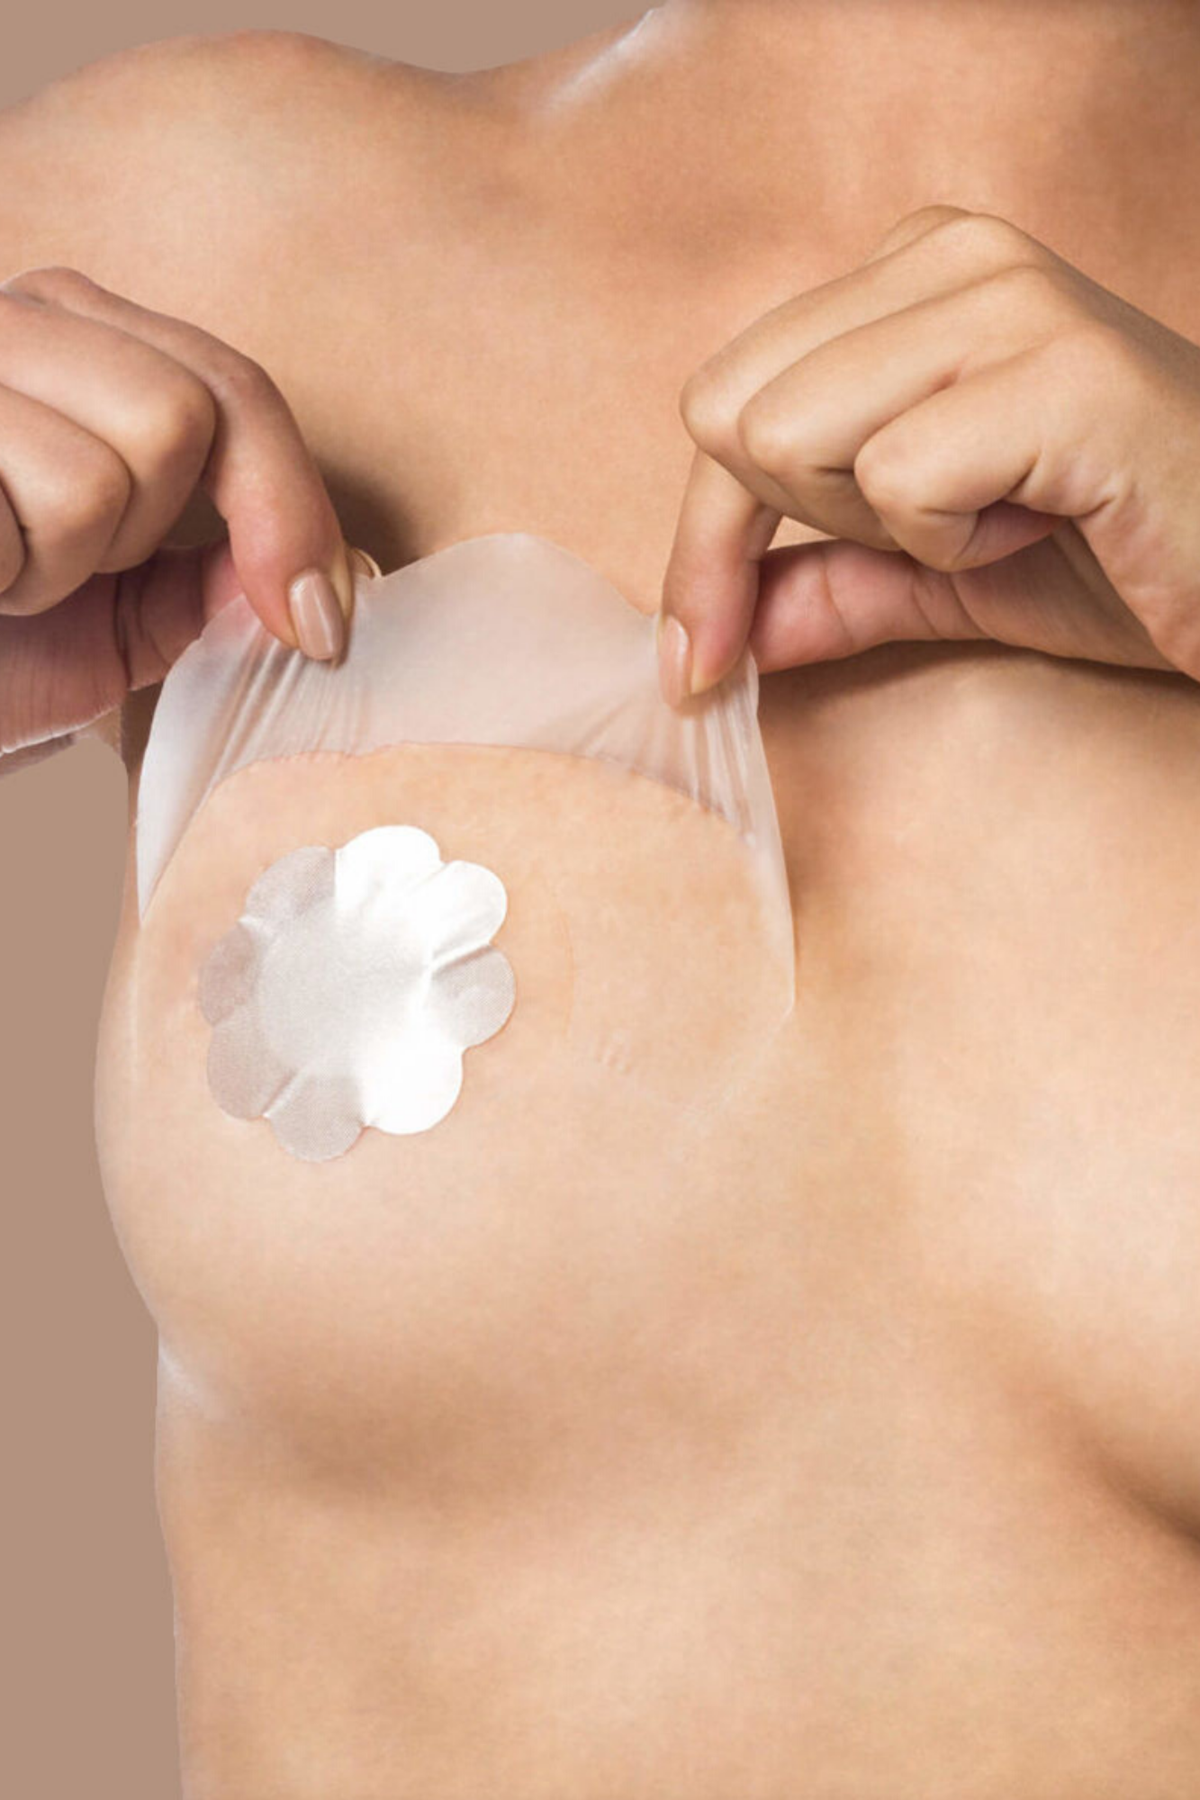 silicone nipple covers